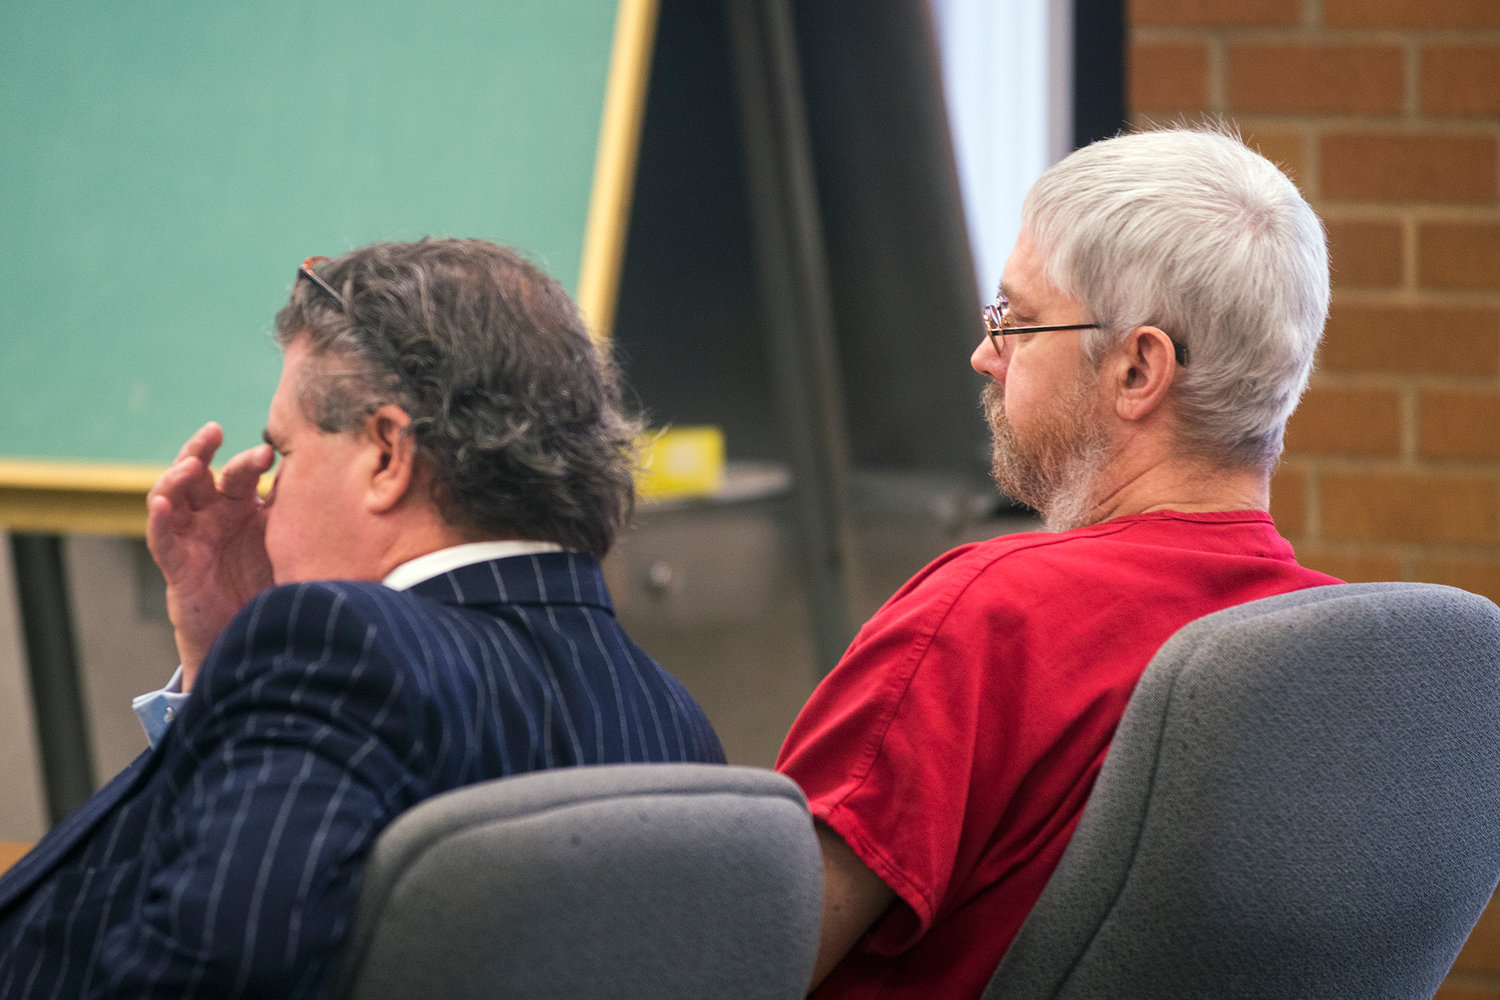 Defense attorney John Crowley, center, and Rick Riffe, react after public statements were made during Riffe's sentencing hearing in Lewis County Superior Court on Monday afternoon at the Lewis County Law and Justice Center in Chehalis.